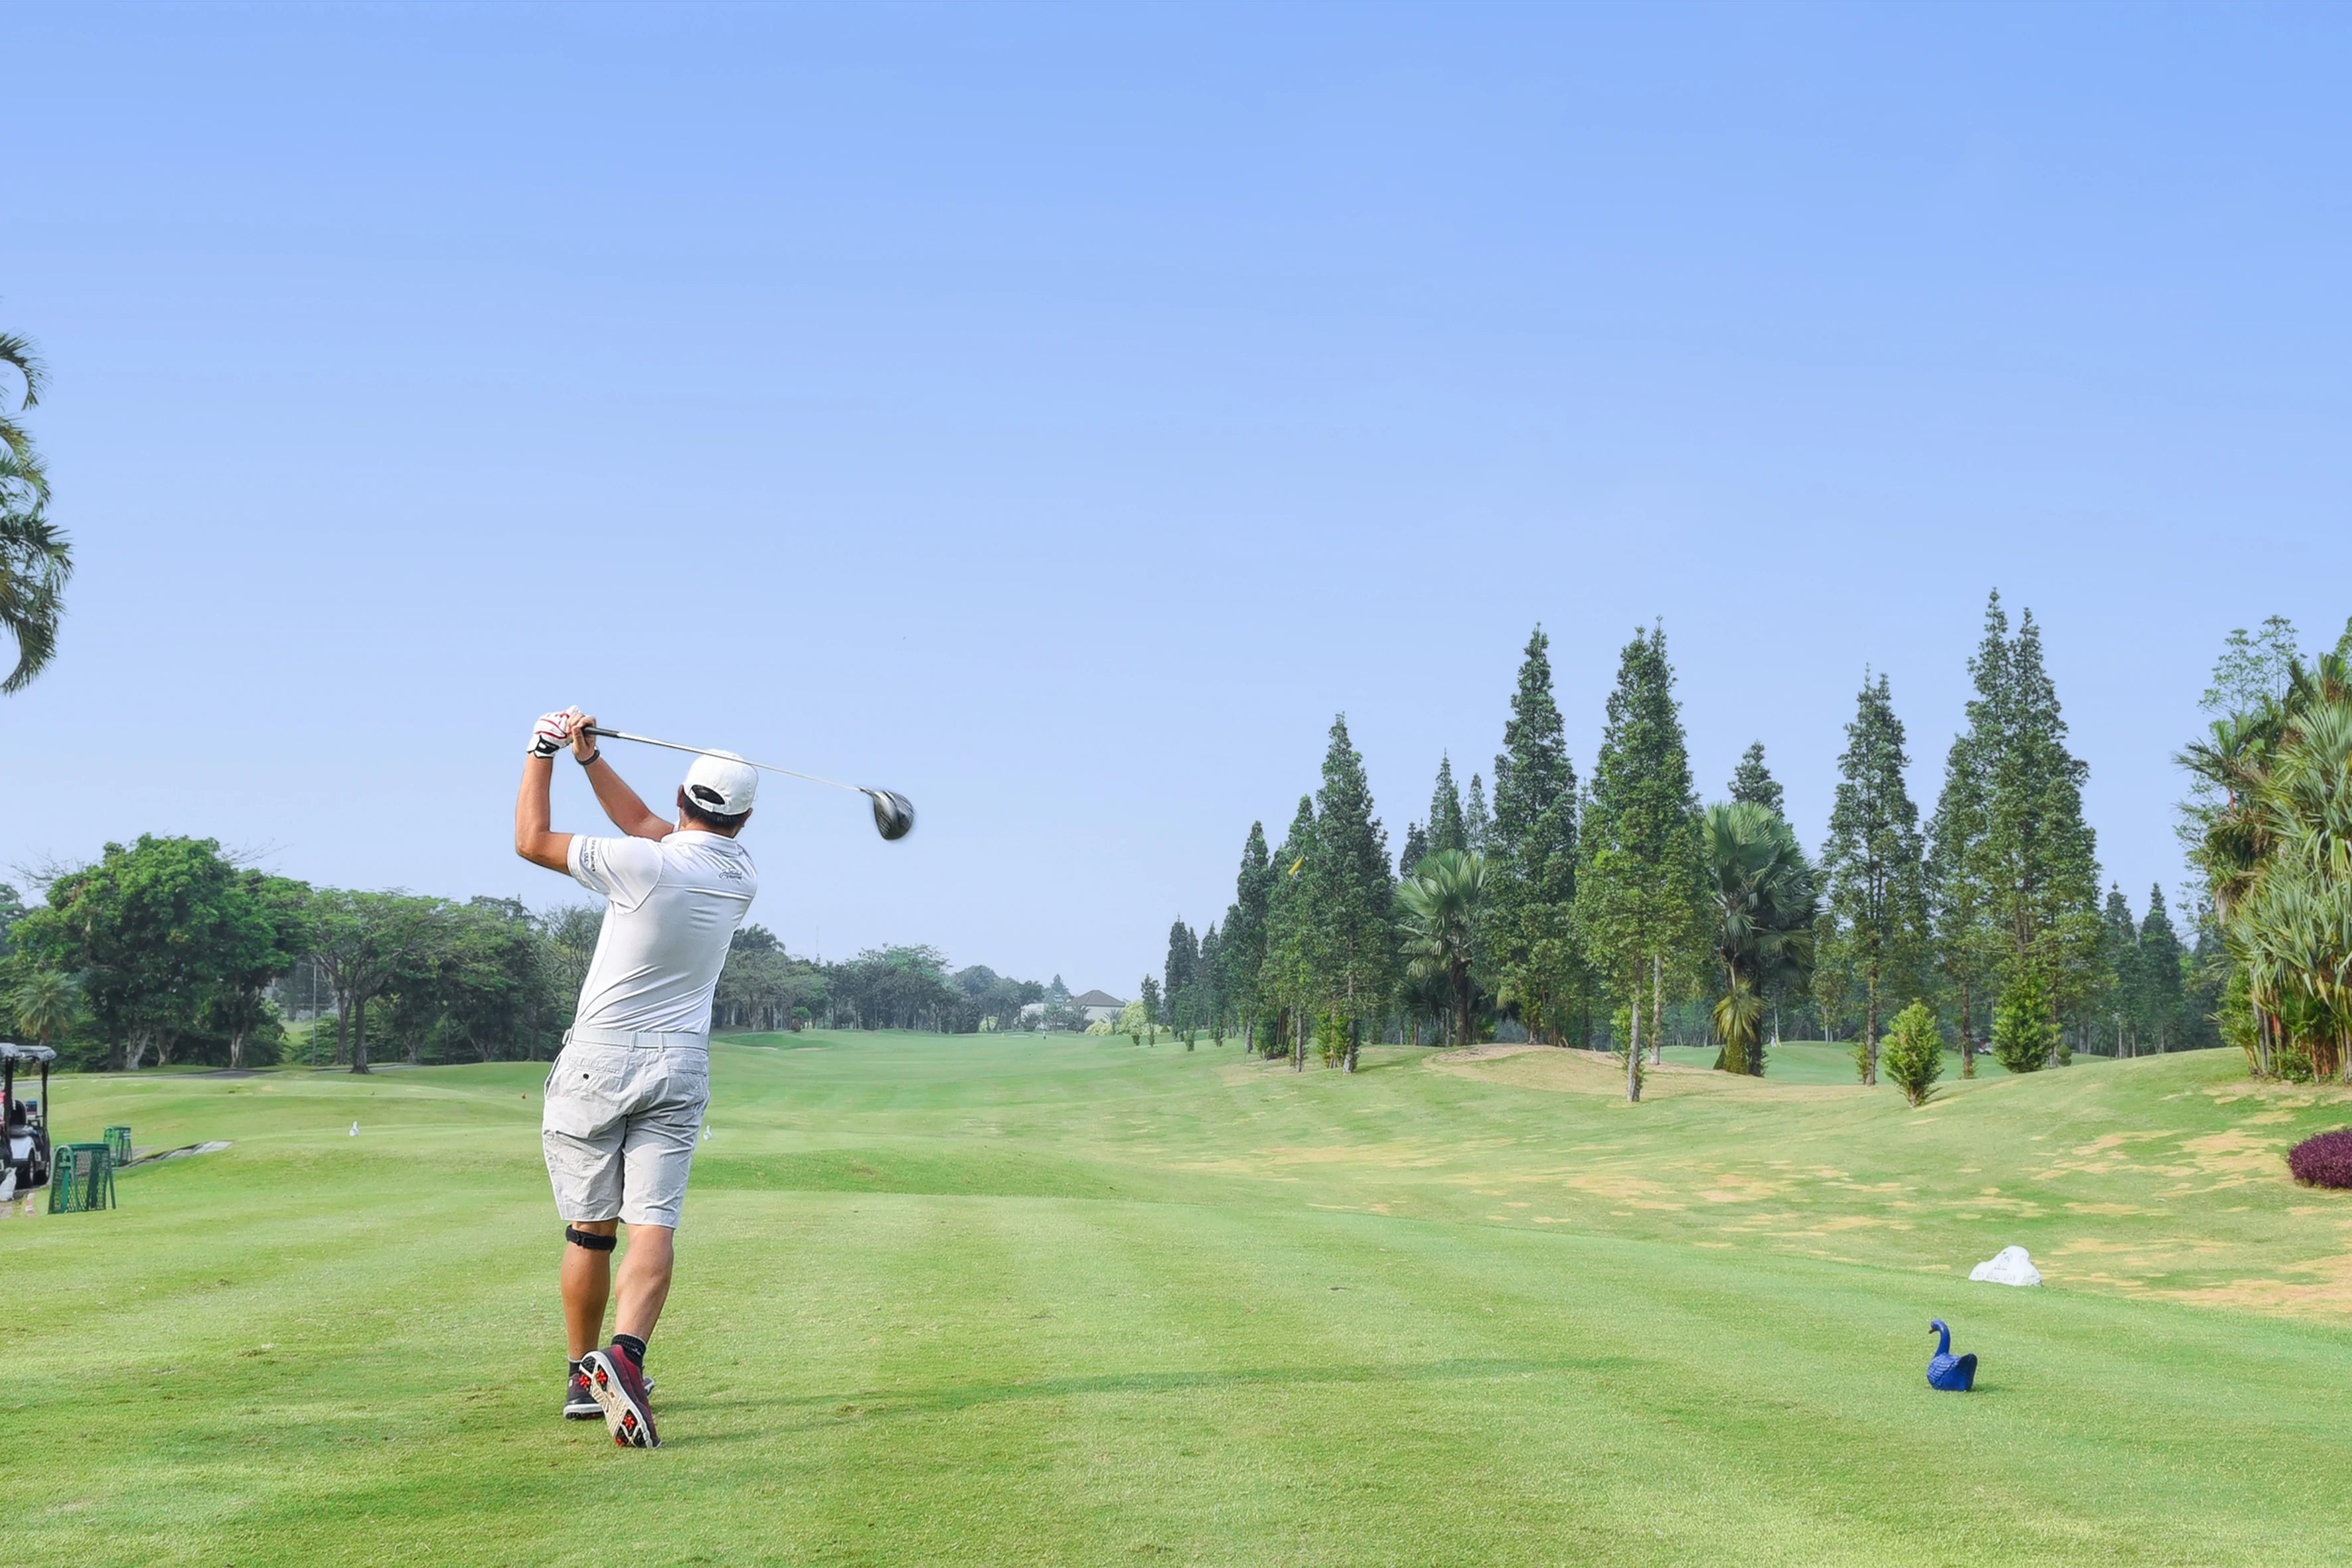 18 Exercises For Golf To Elevate Your Game